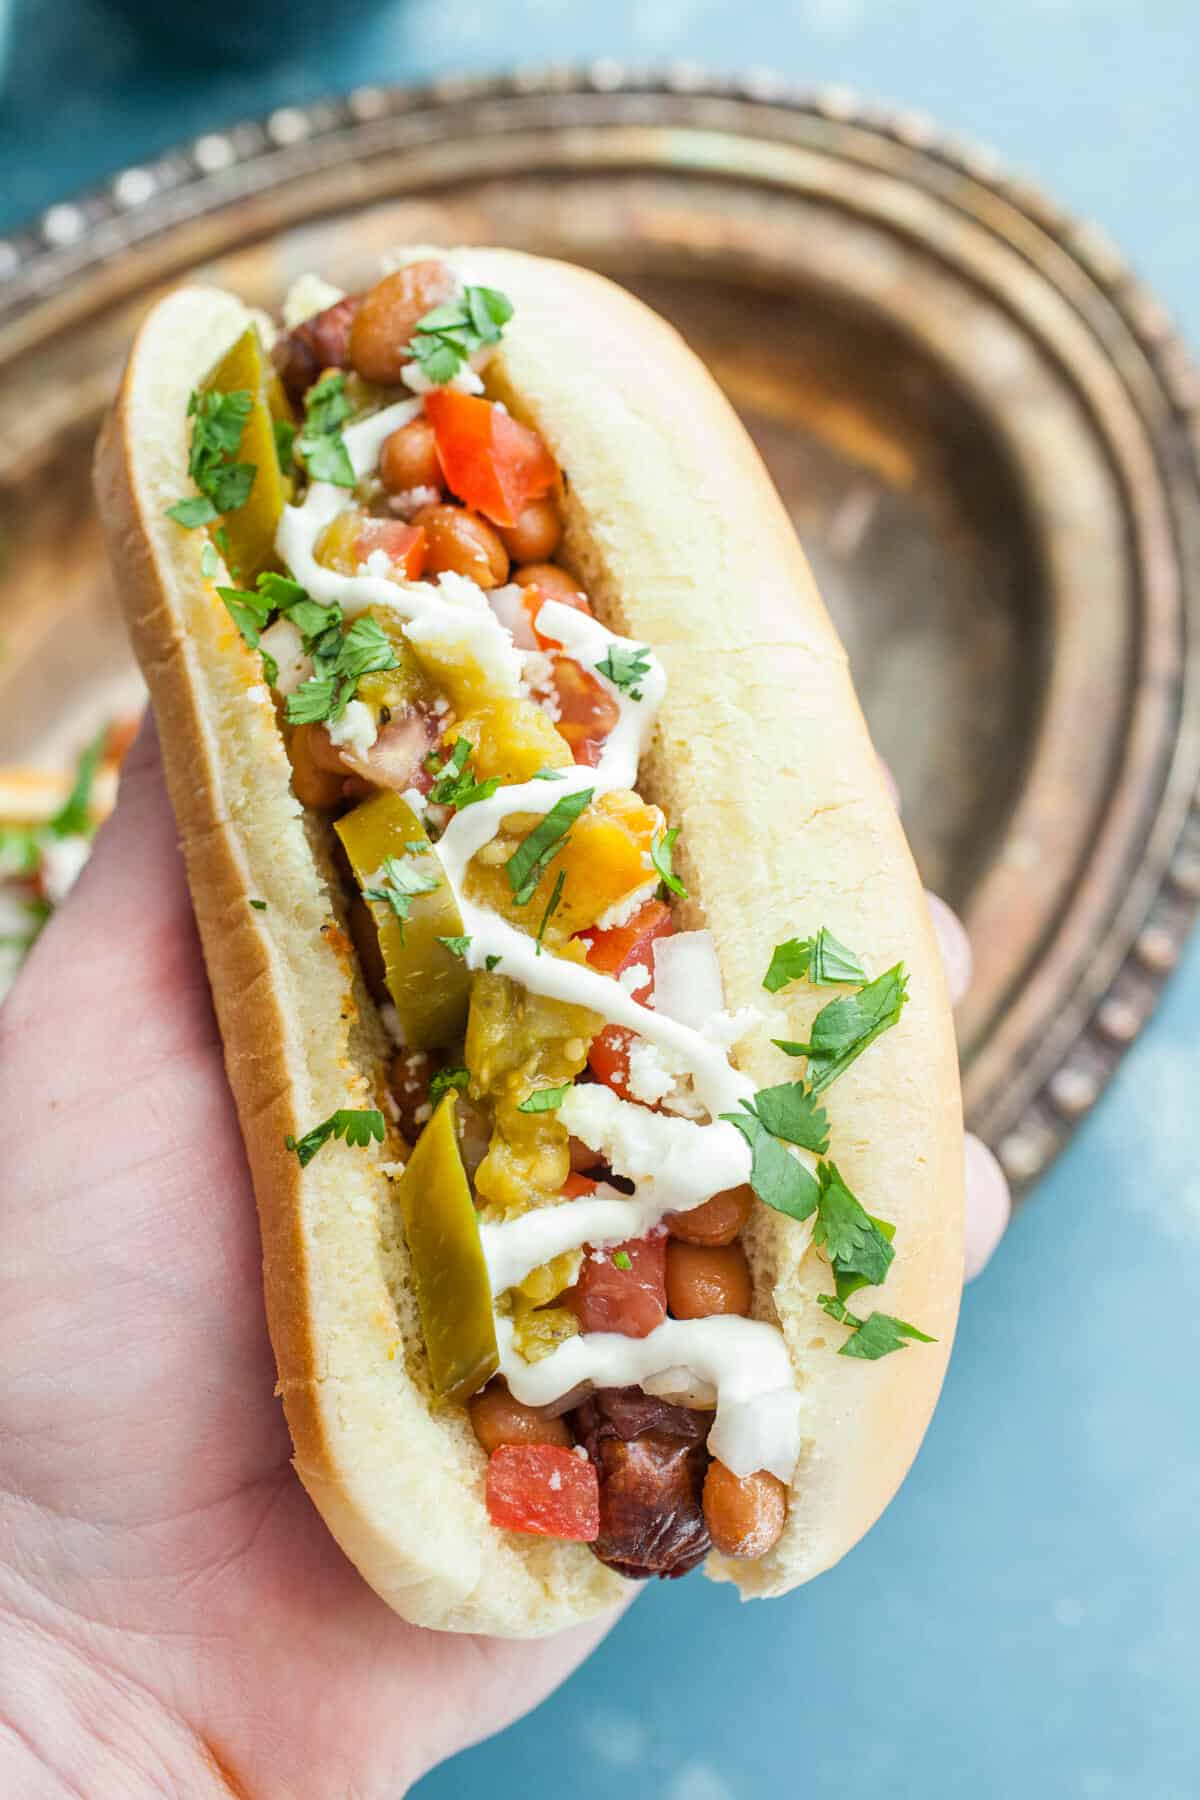 How to make Sonoran Hot Dogs